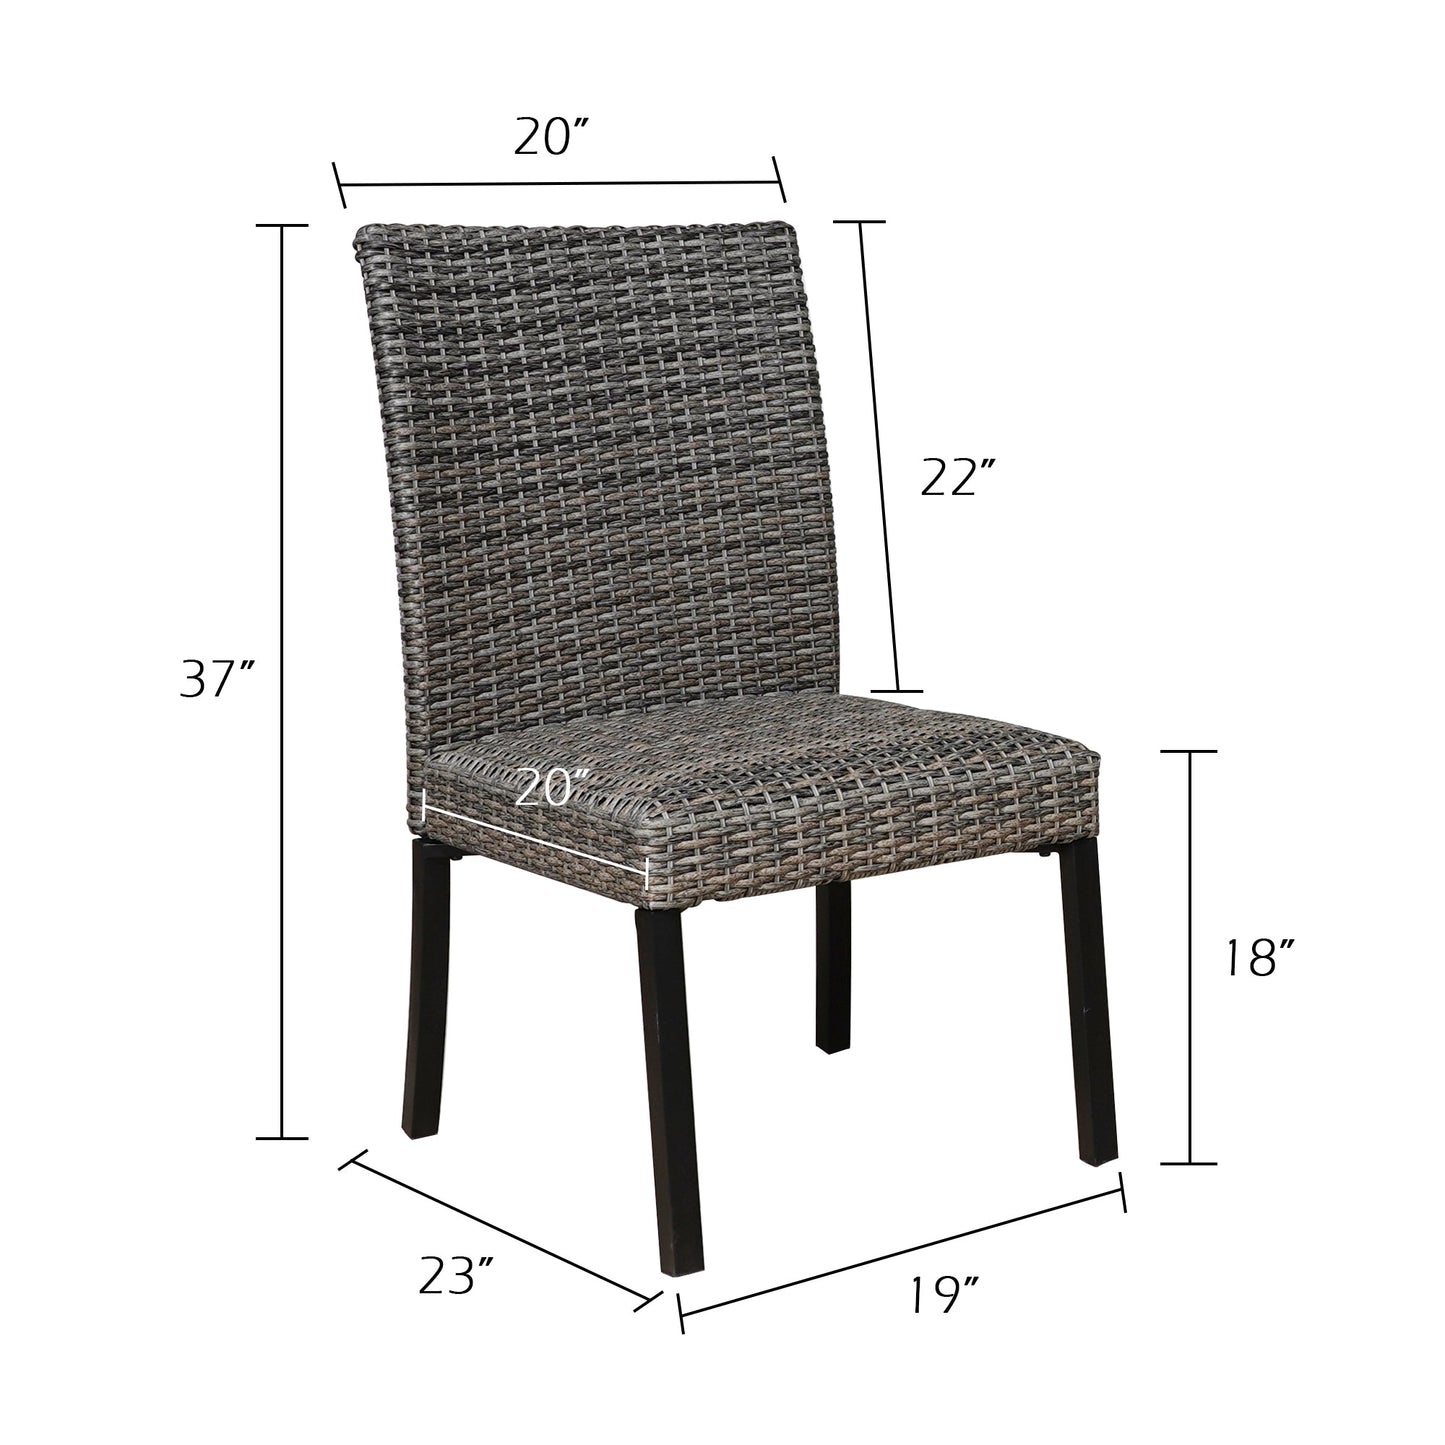 Patio Wicker Dining Chairs Outdoor Heavy-Duty Steel Frame Rattan Chairs with Quick Dry Foam Filling and Curved Backrest, Set of 4